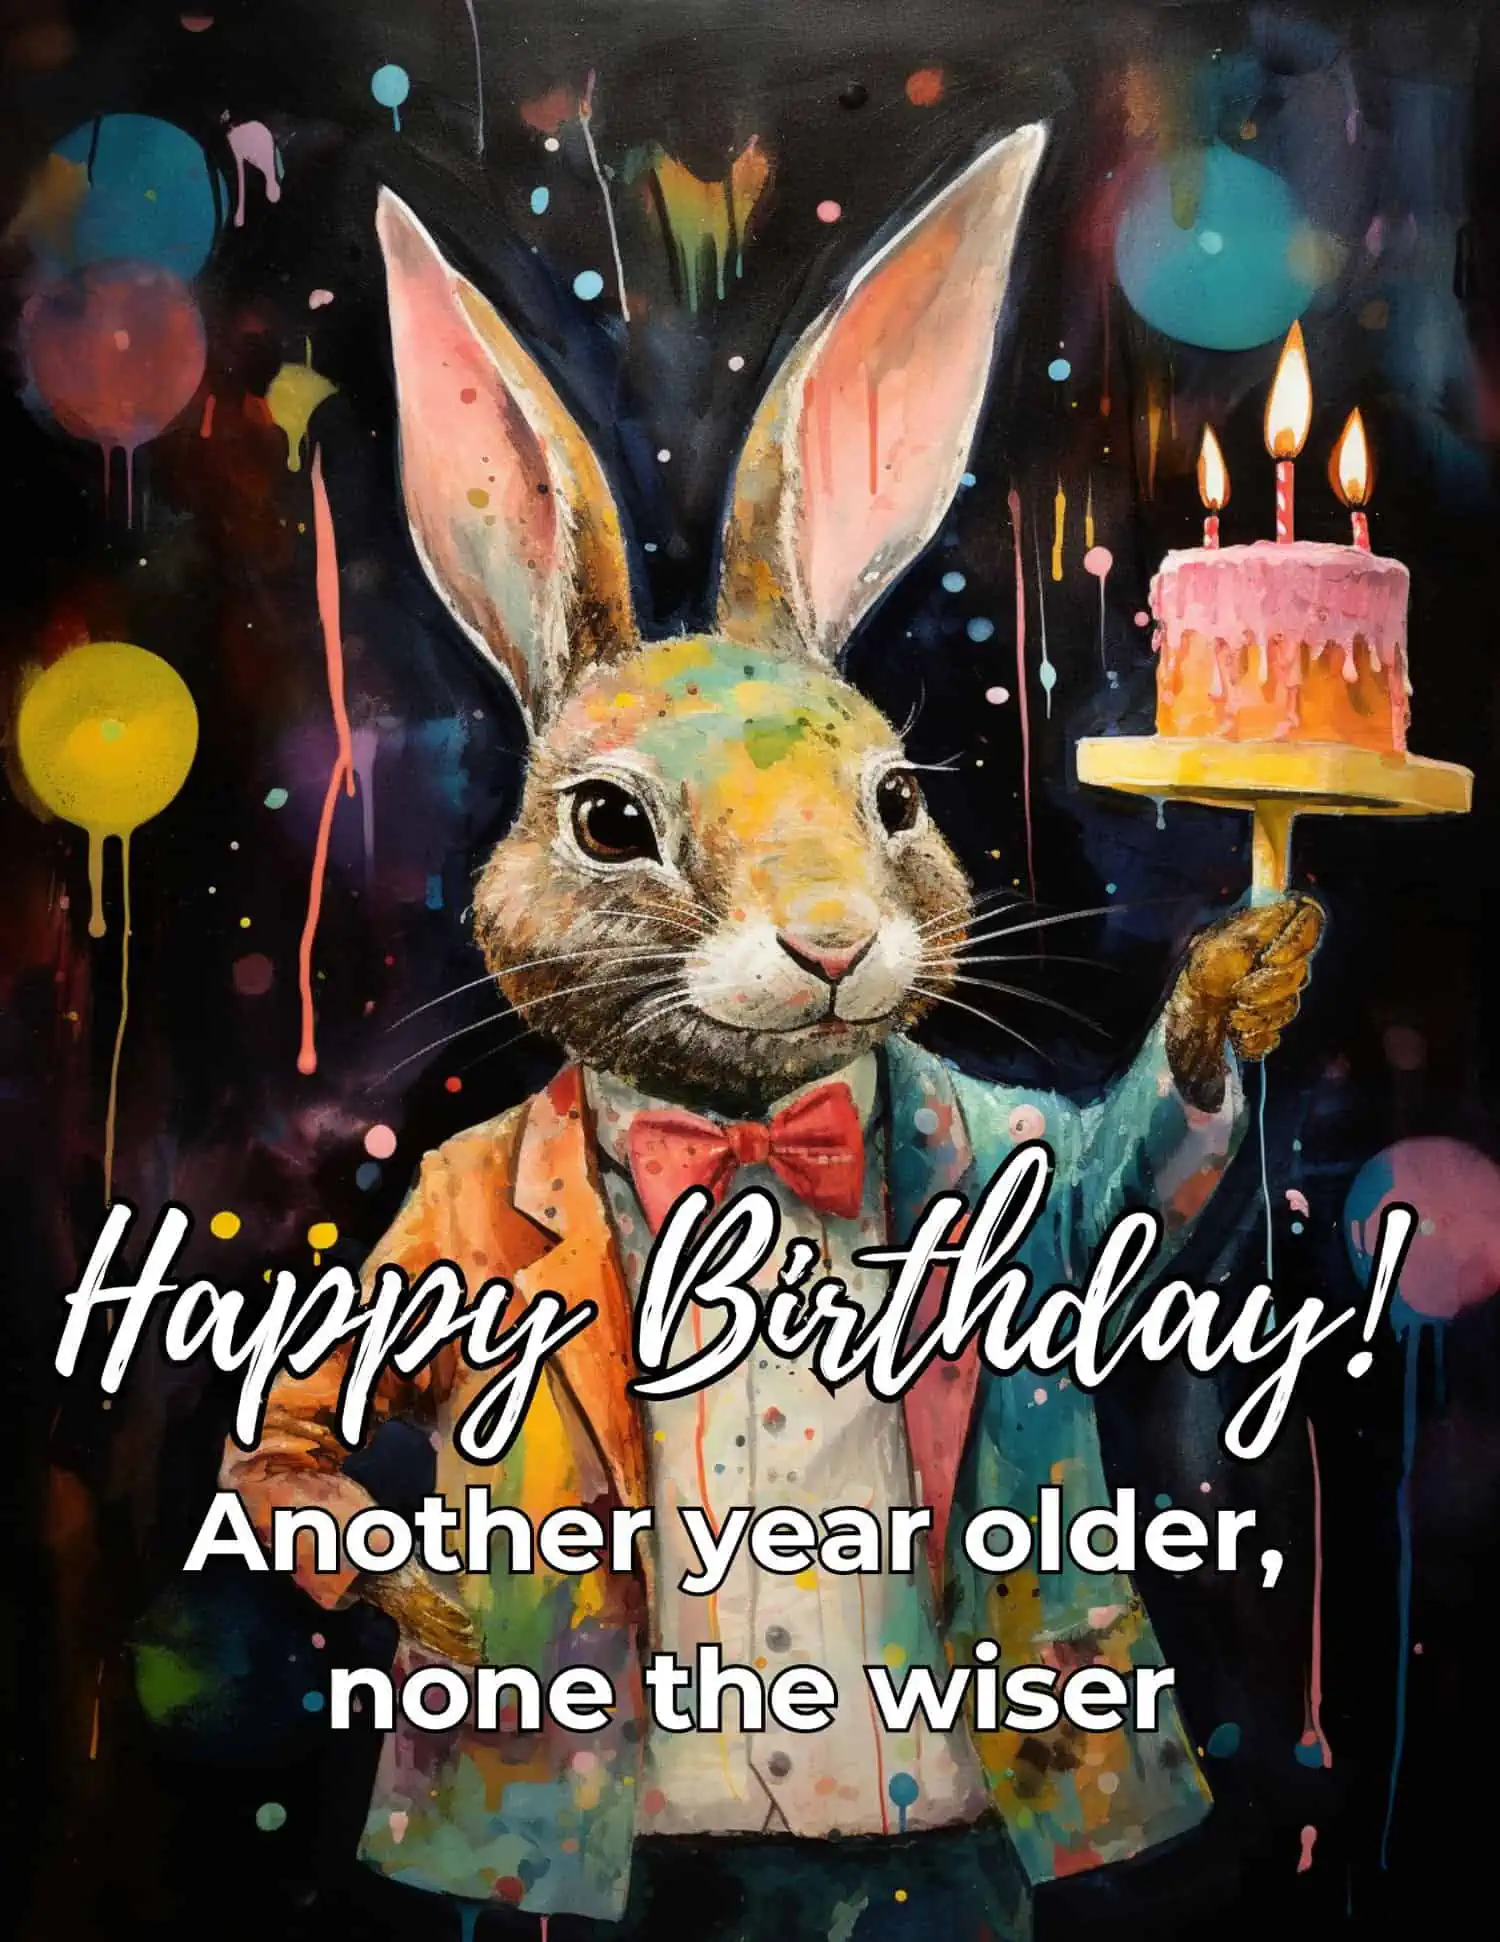 A selection of brief and humorous birthday messages designed to deliver a quick laugh and add fun to the birthday celebration.